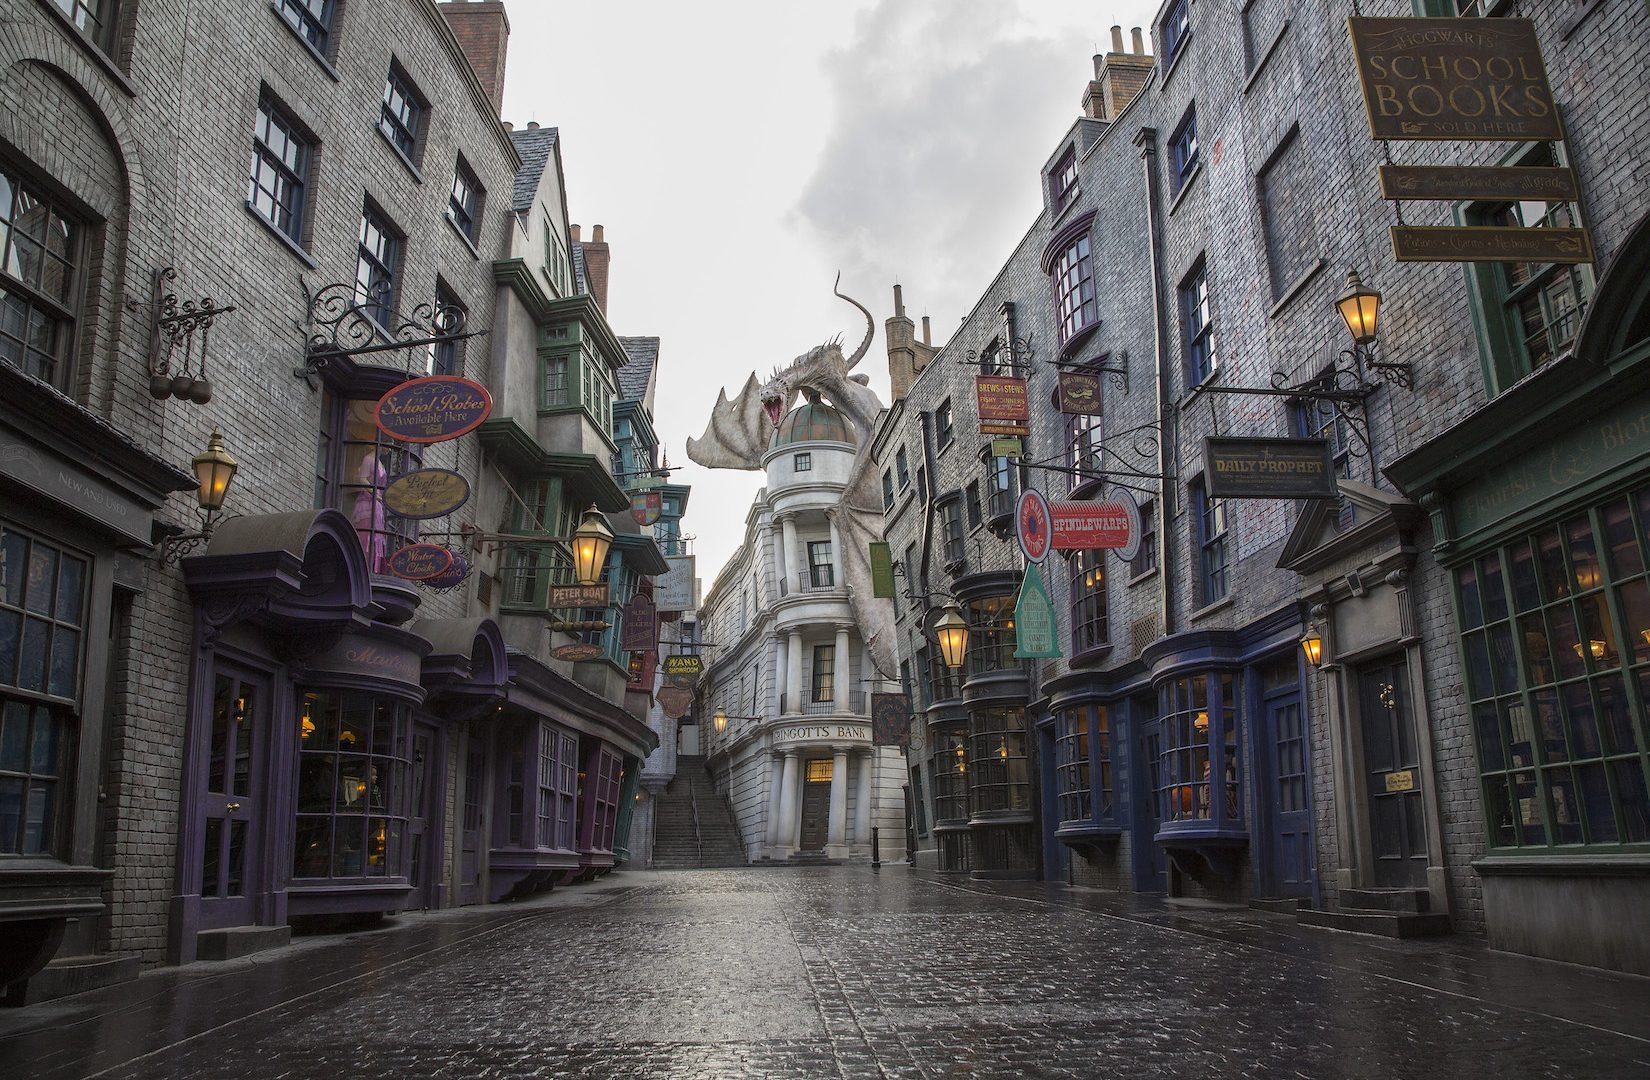 Guide to the Wizarding World of Harry Potter in Orlando, Florida